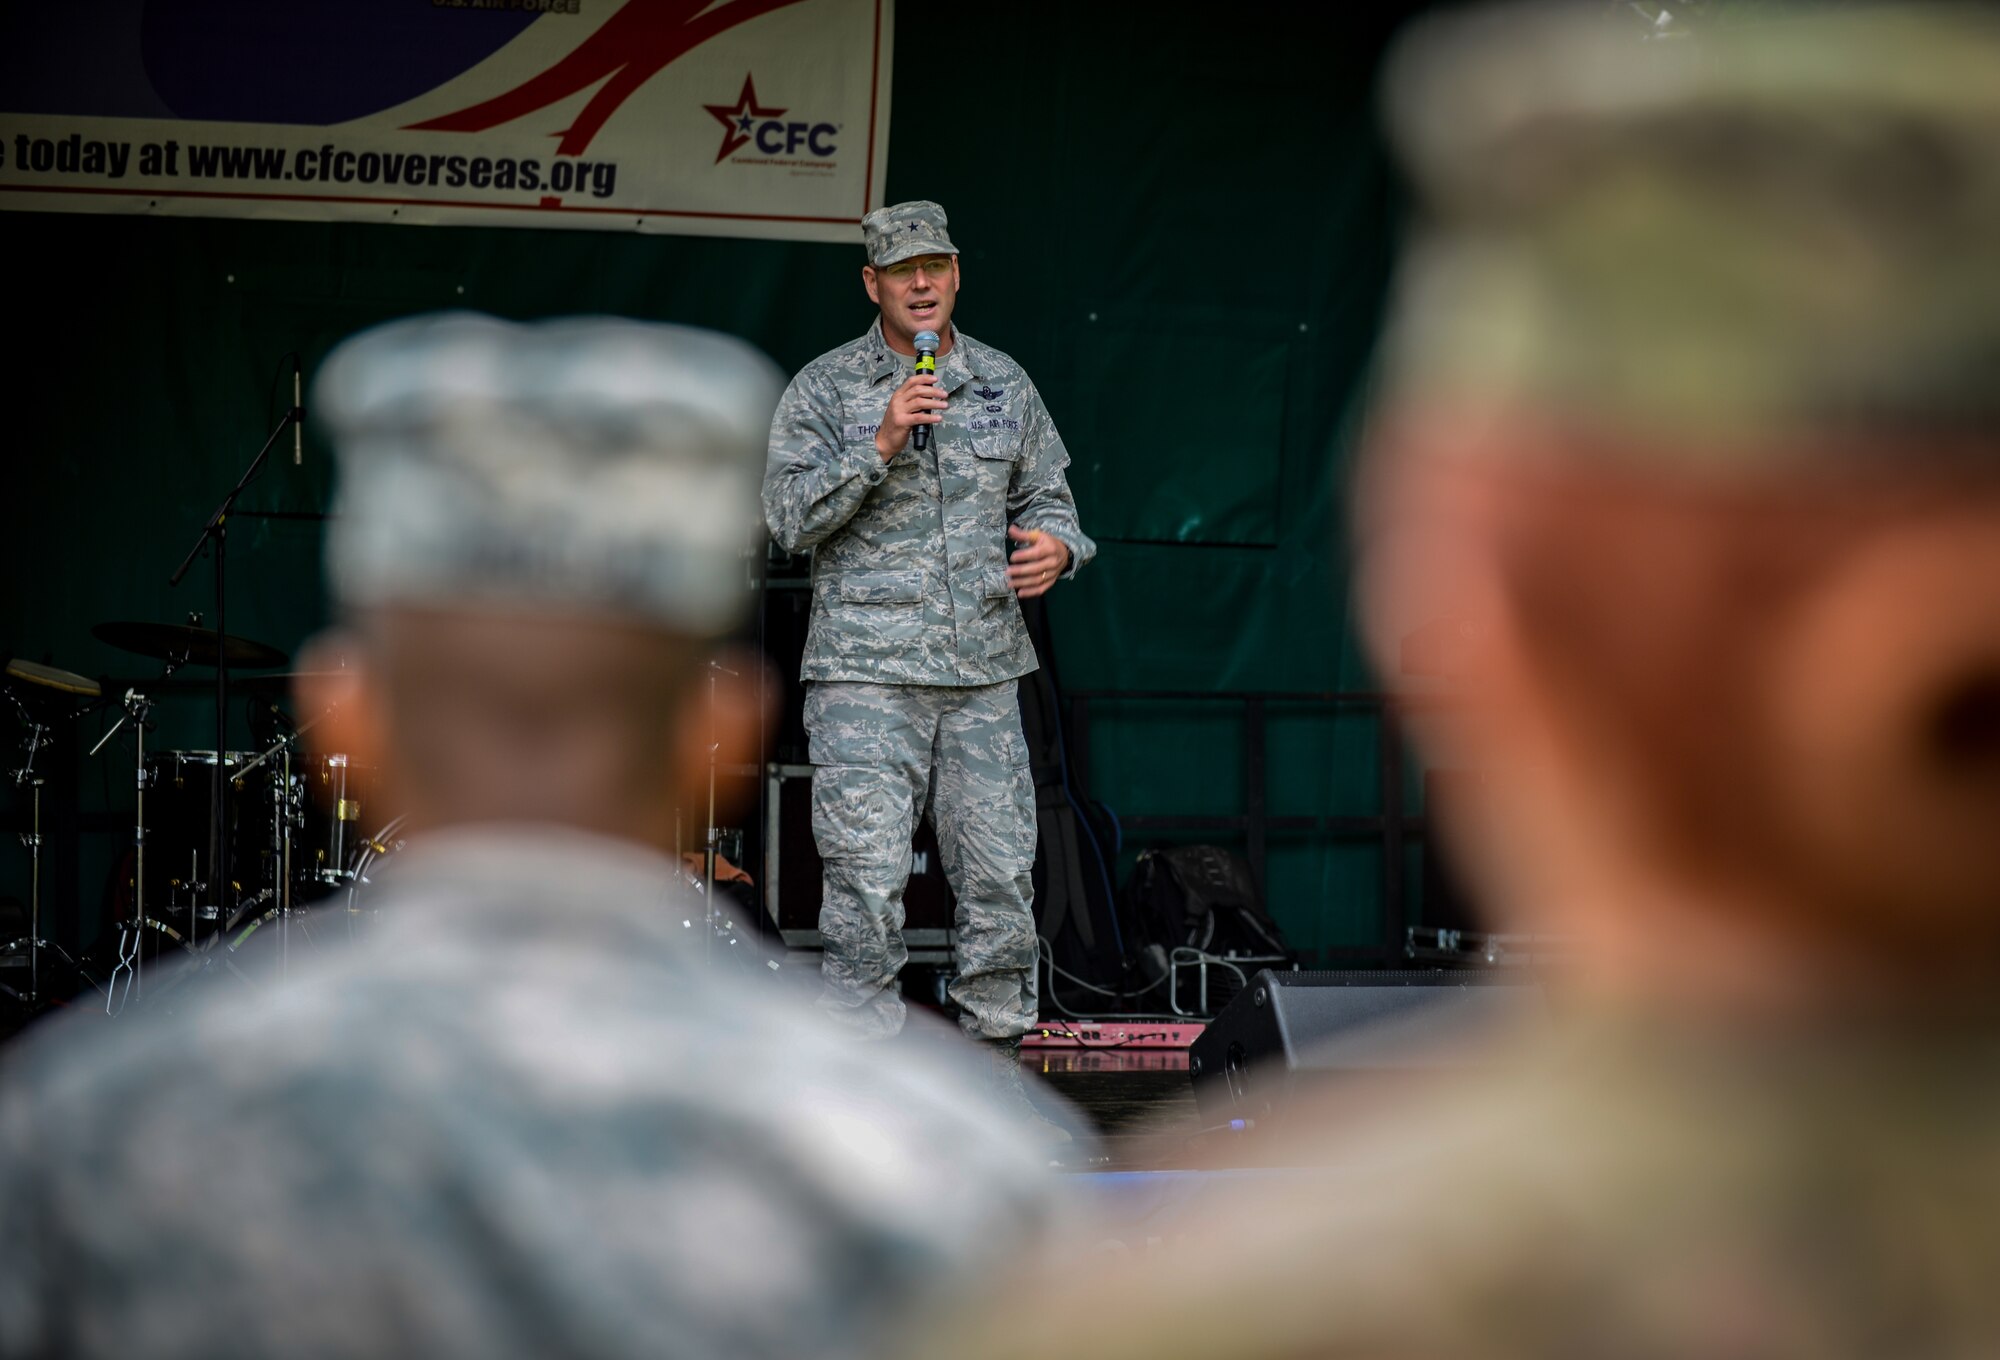 Brig. Gen. Jon T. Thomas, 86th Airlift Wing commander, speaks at the opening ceremony of the Combined Federal Campaign-Overseas kickoff Sept. 15, 2015, on Vogelweh Military Complex, Germany. The CFC-O holds an annual fundraiser that helps commanders improve quality of life programs for service members. (U.S. Air Force photo/Senior Airman Nicole Sikorski)